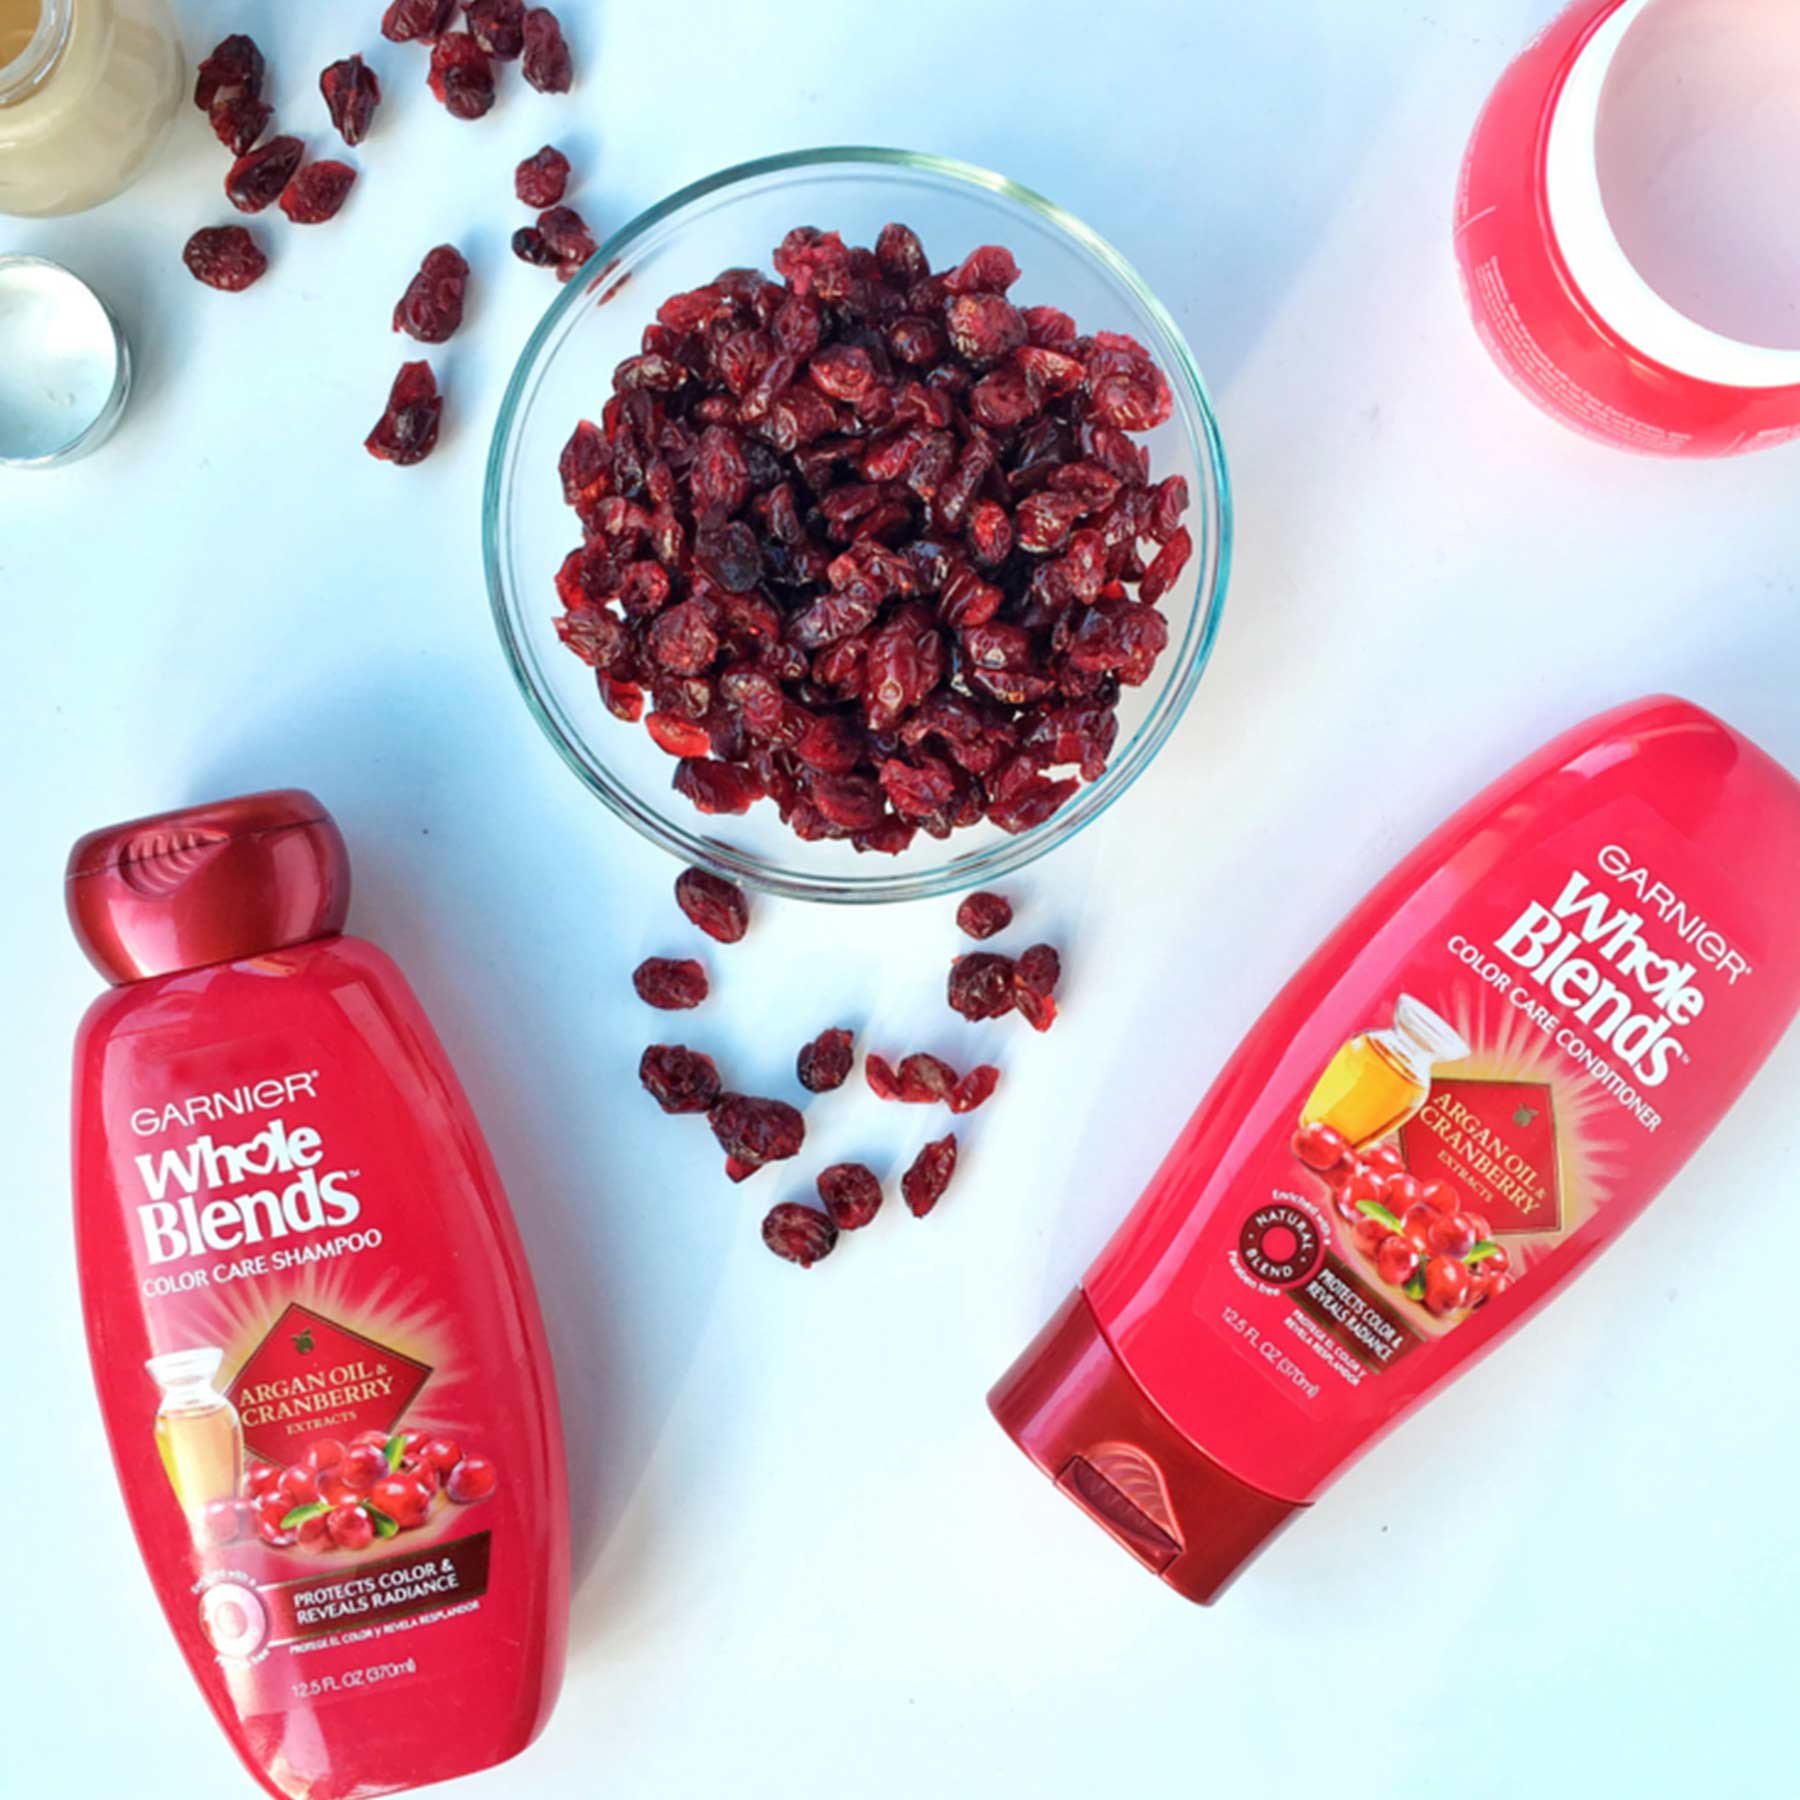 Whole Blends Color Care Shampoo with Argan Oil and Cranberry and Color Care Conditioner with Argan Oil and Cranberry on a blue-white background with an open jar of Argan Oil and Cranberry Color Care Mask, open jar of foundation, and a bowl of dried cranberries with some spilled out.